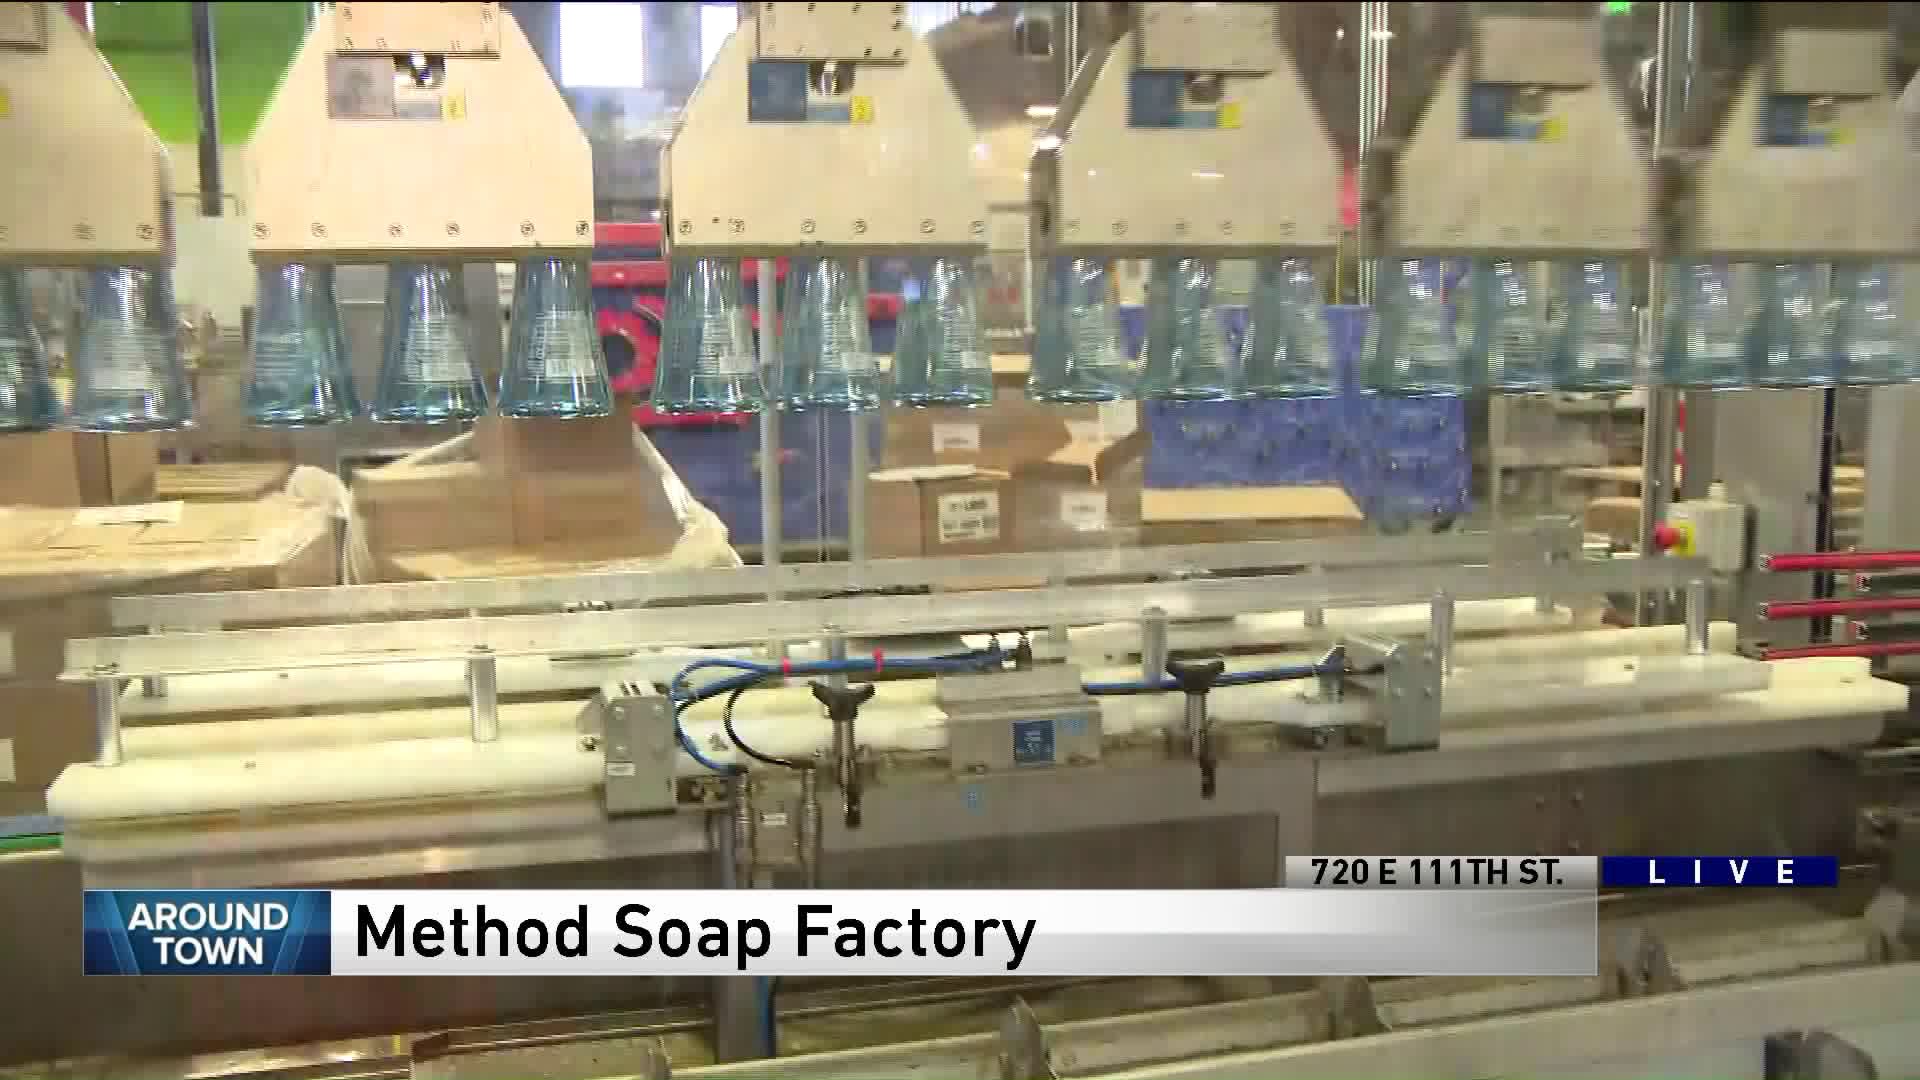 Around Town gets a behind the scenes look at the Method Soap Factory